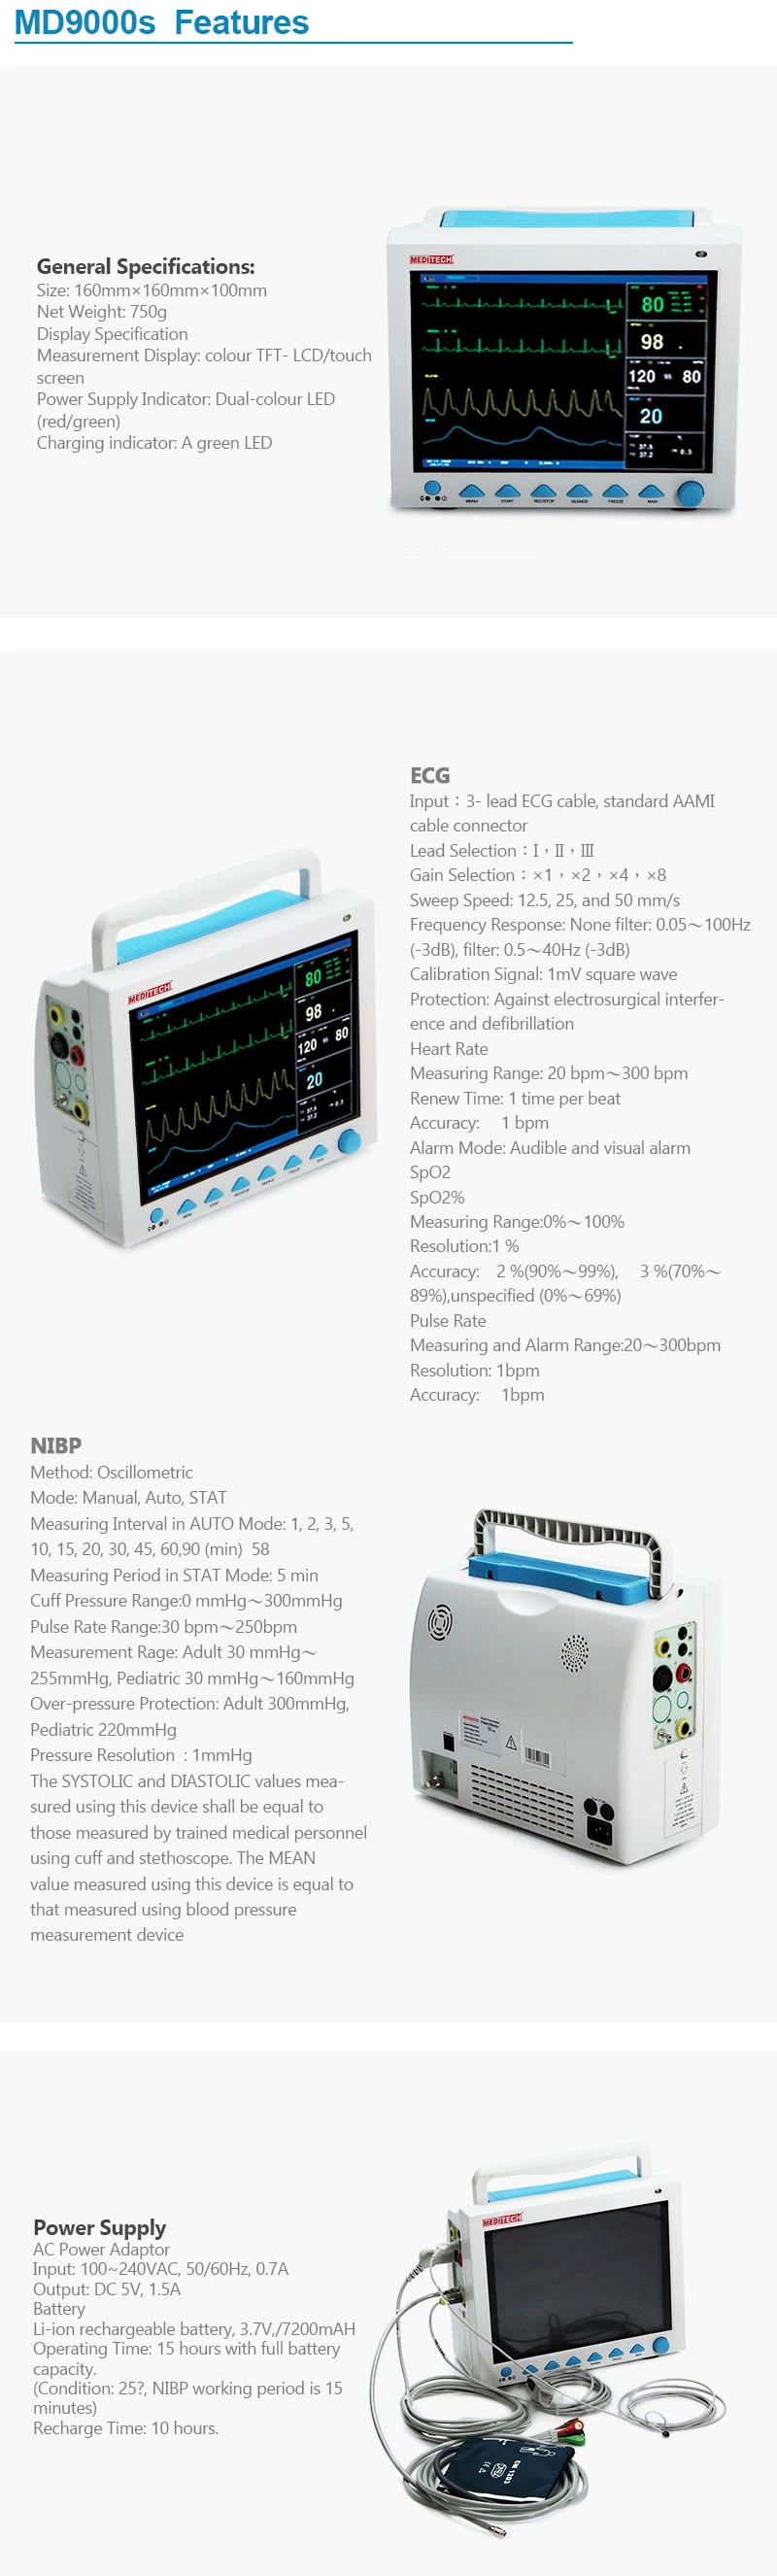 Factory Direct Monitoring First Aid Medical Cardiac Patient Equipment